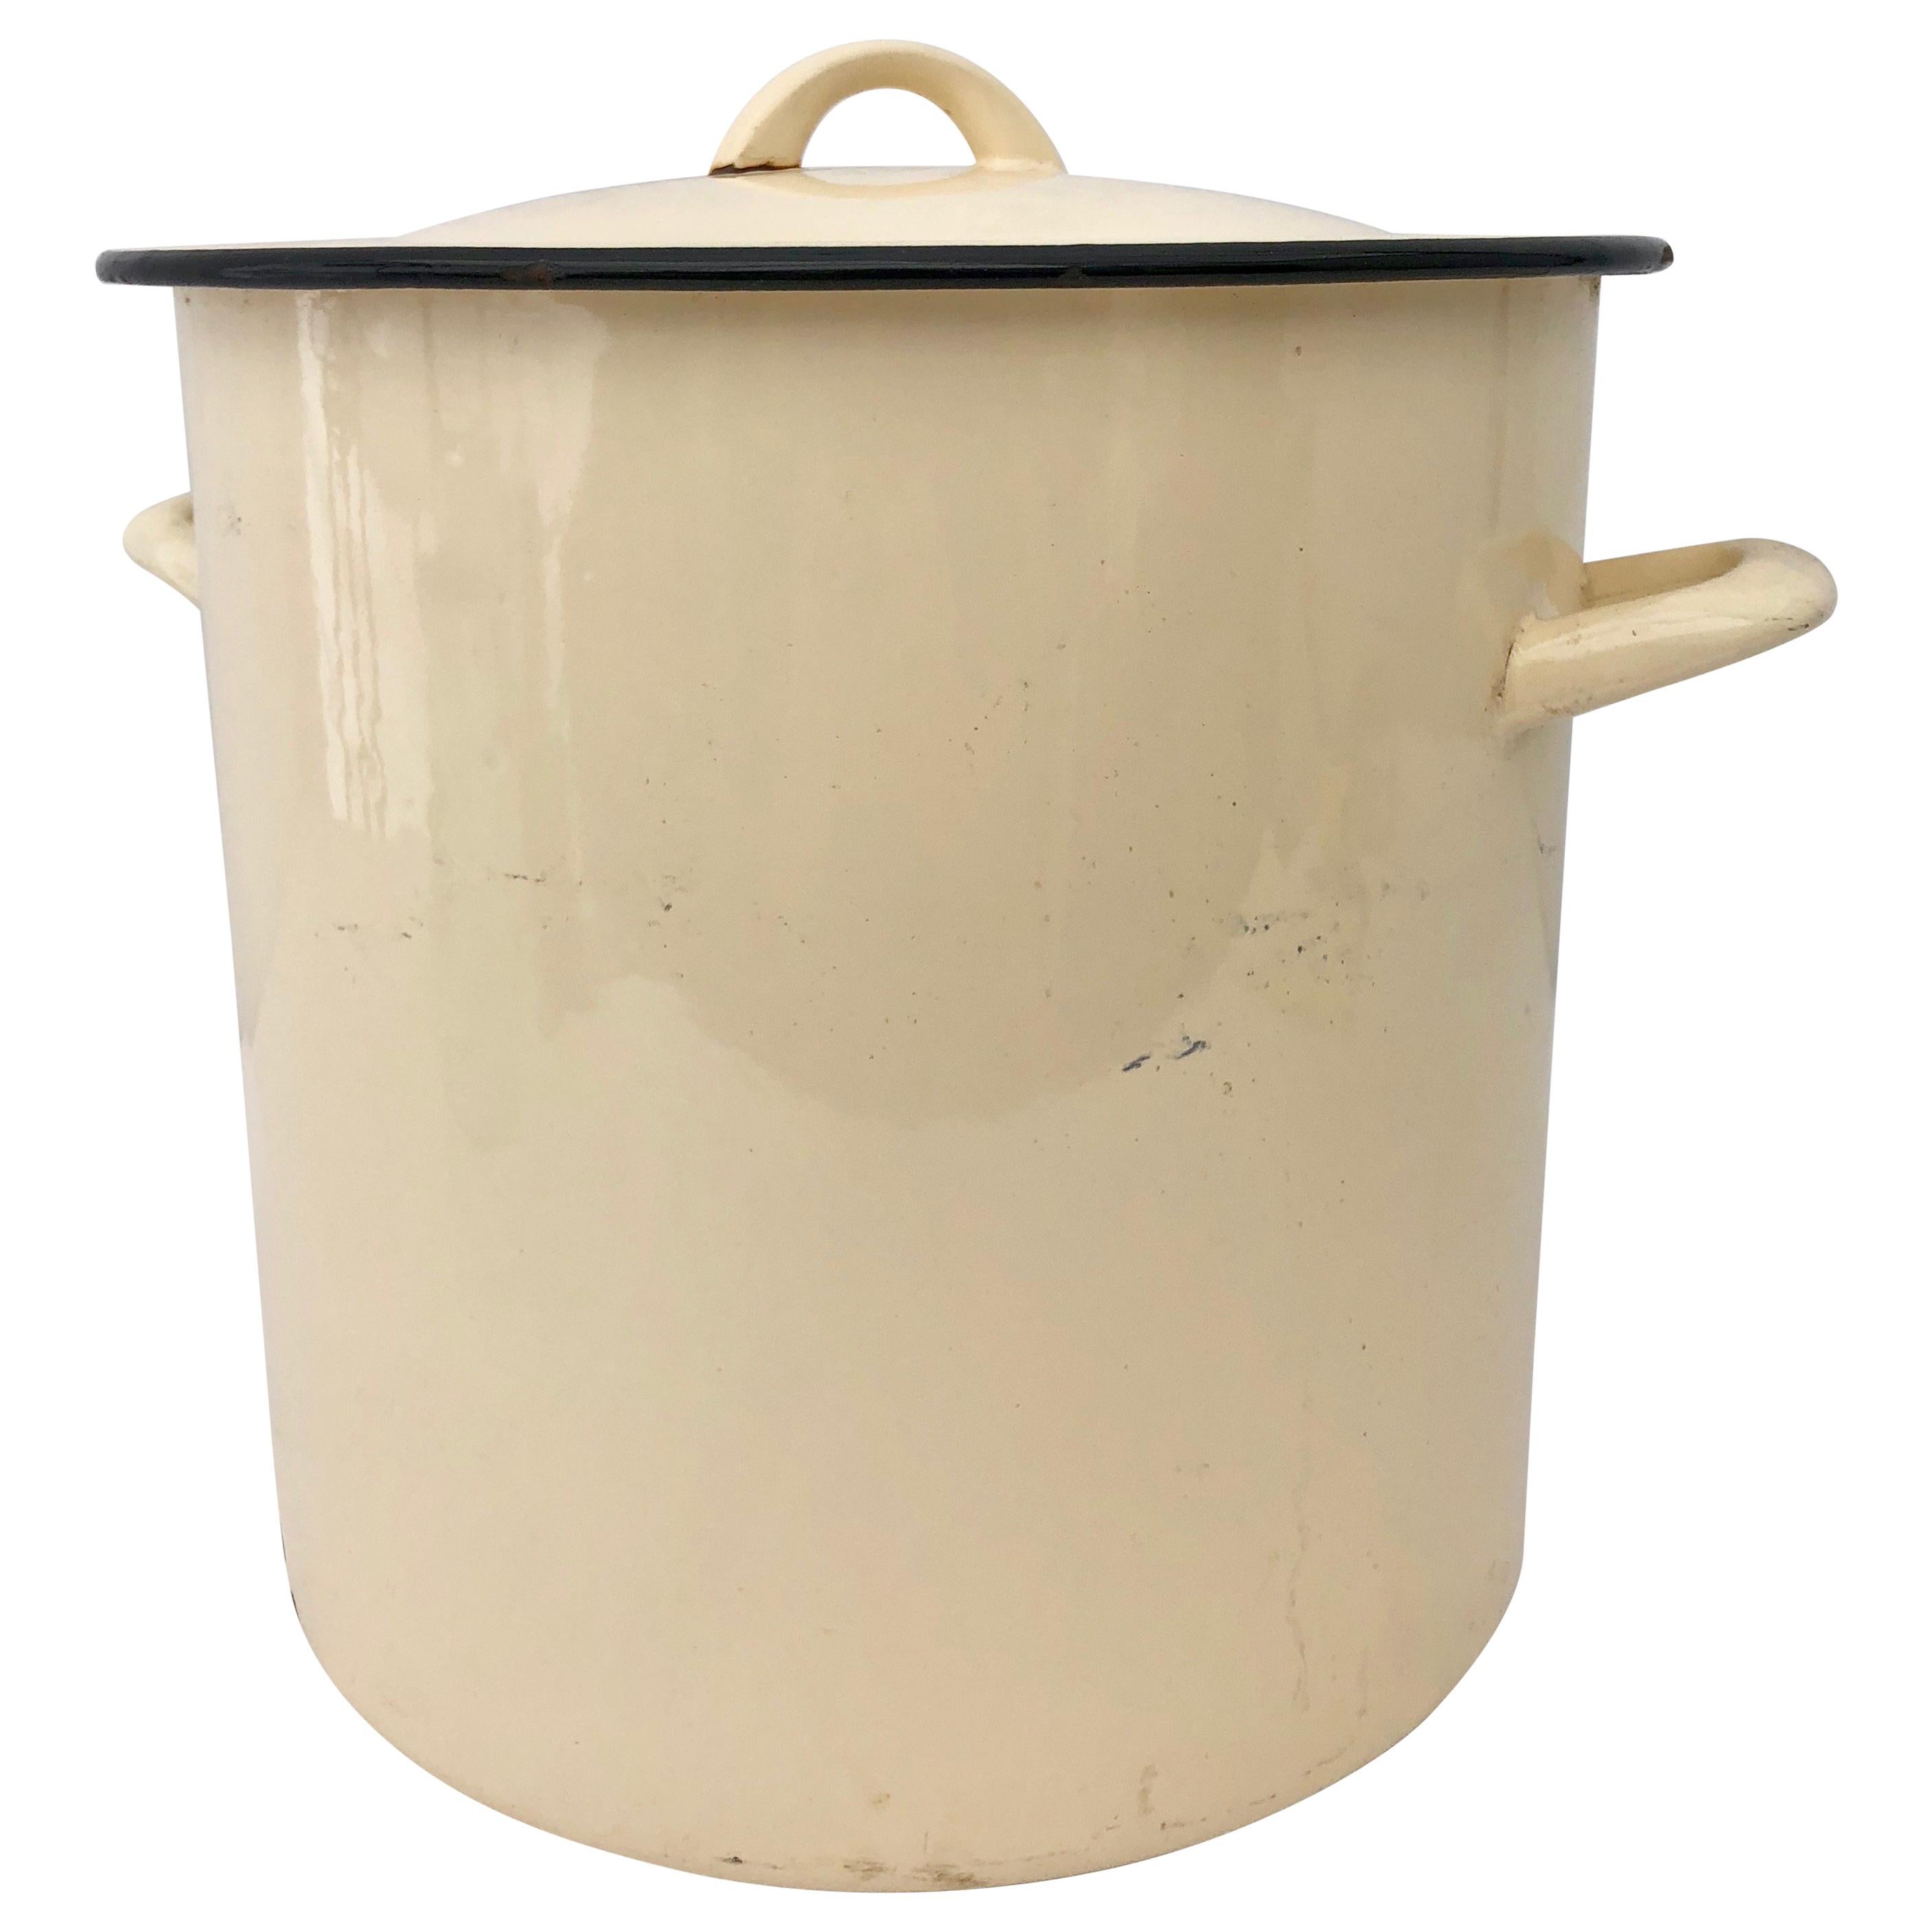 Vintage French Enamelware Large Yellow Pot with Its Original Black Trimmed Lid For Sale